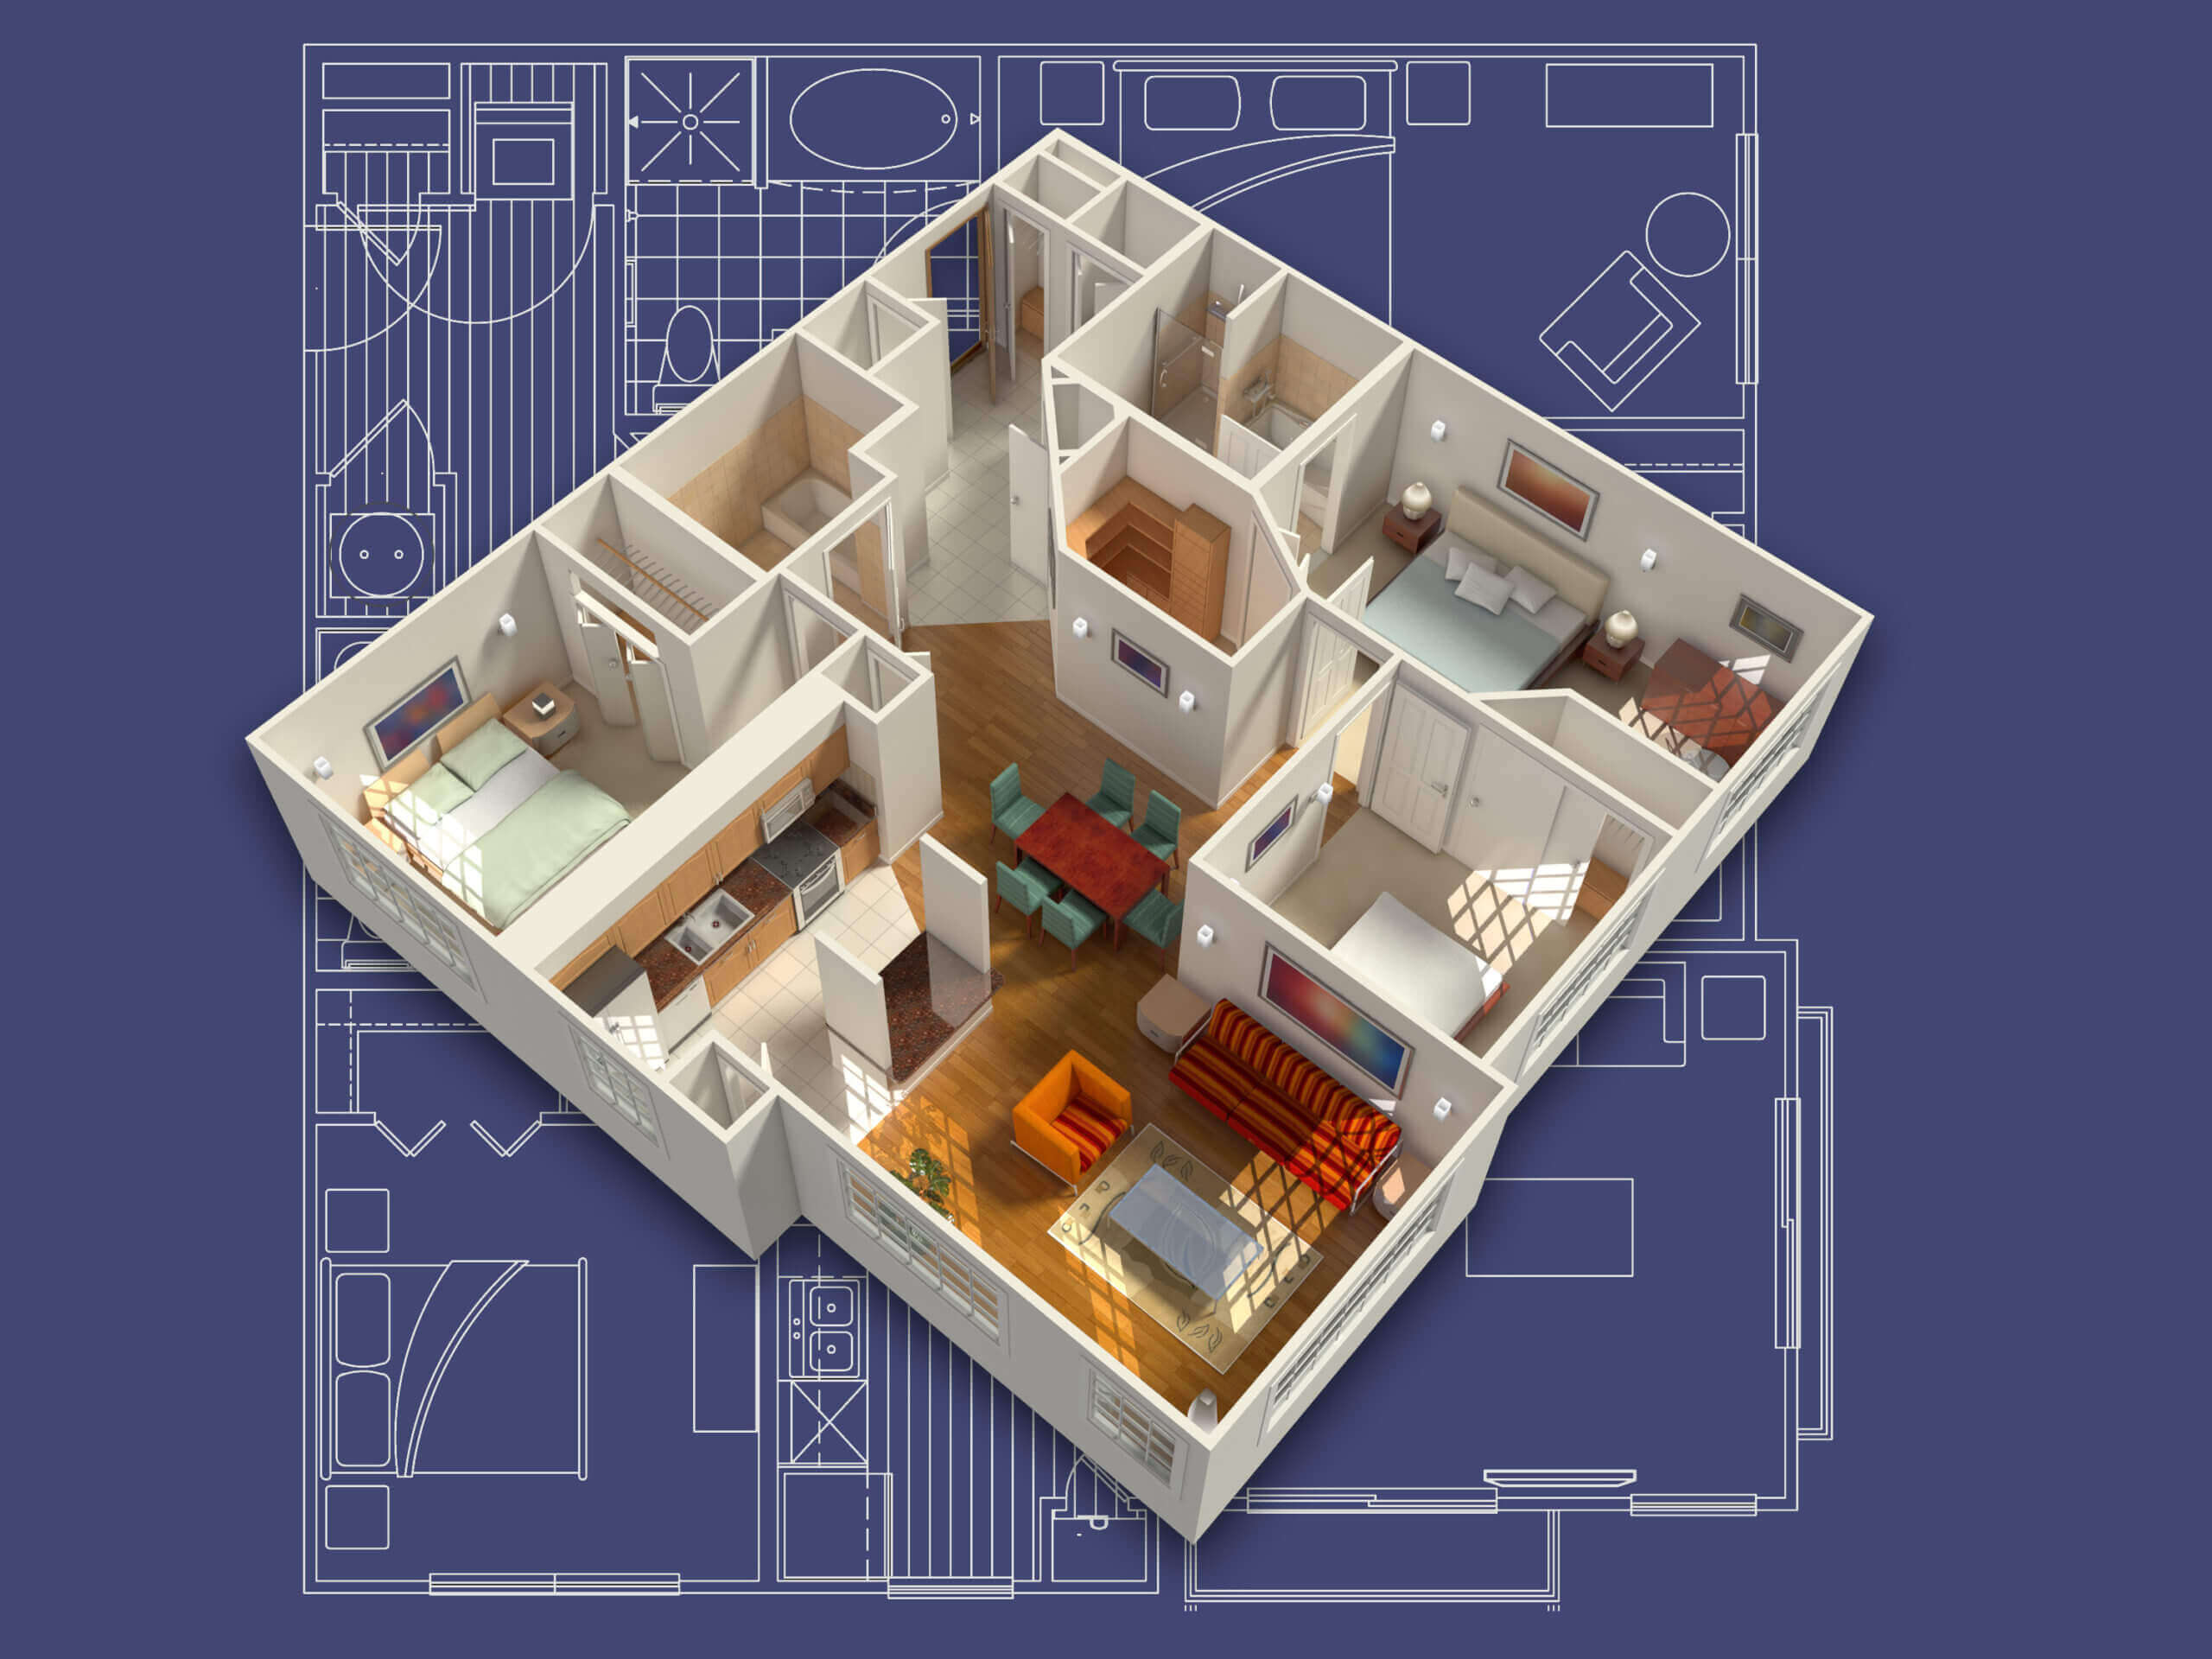 3D model of a house interior